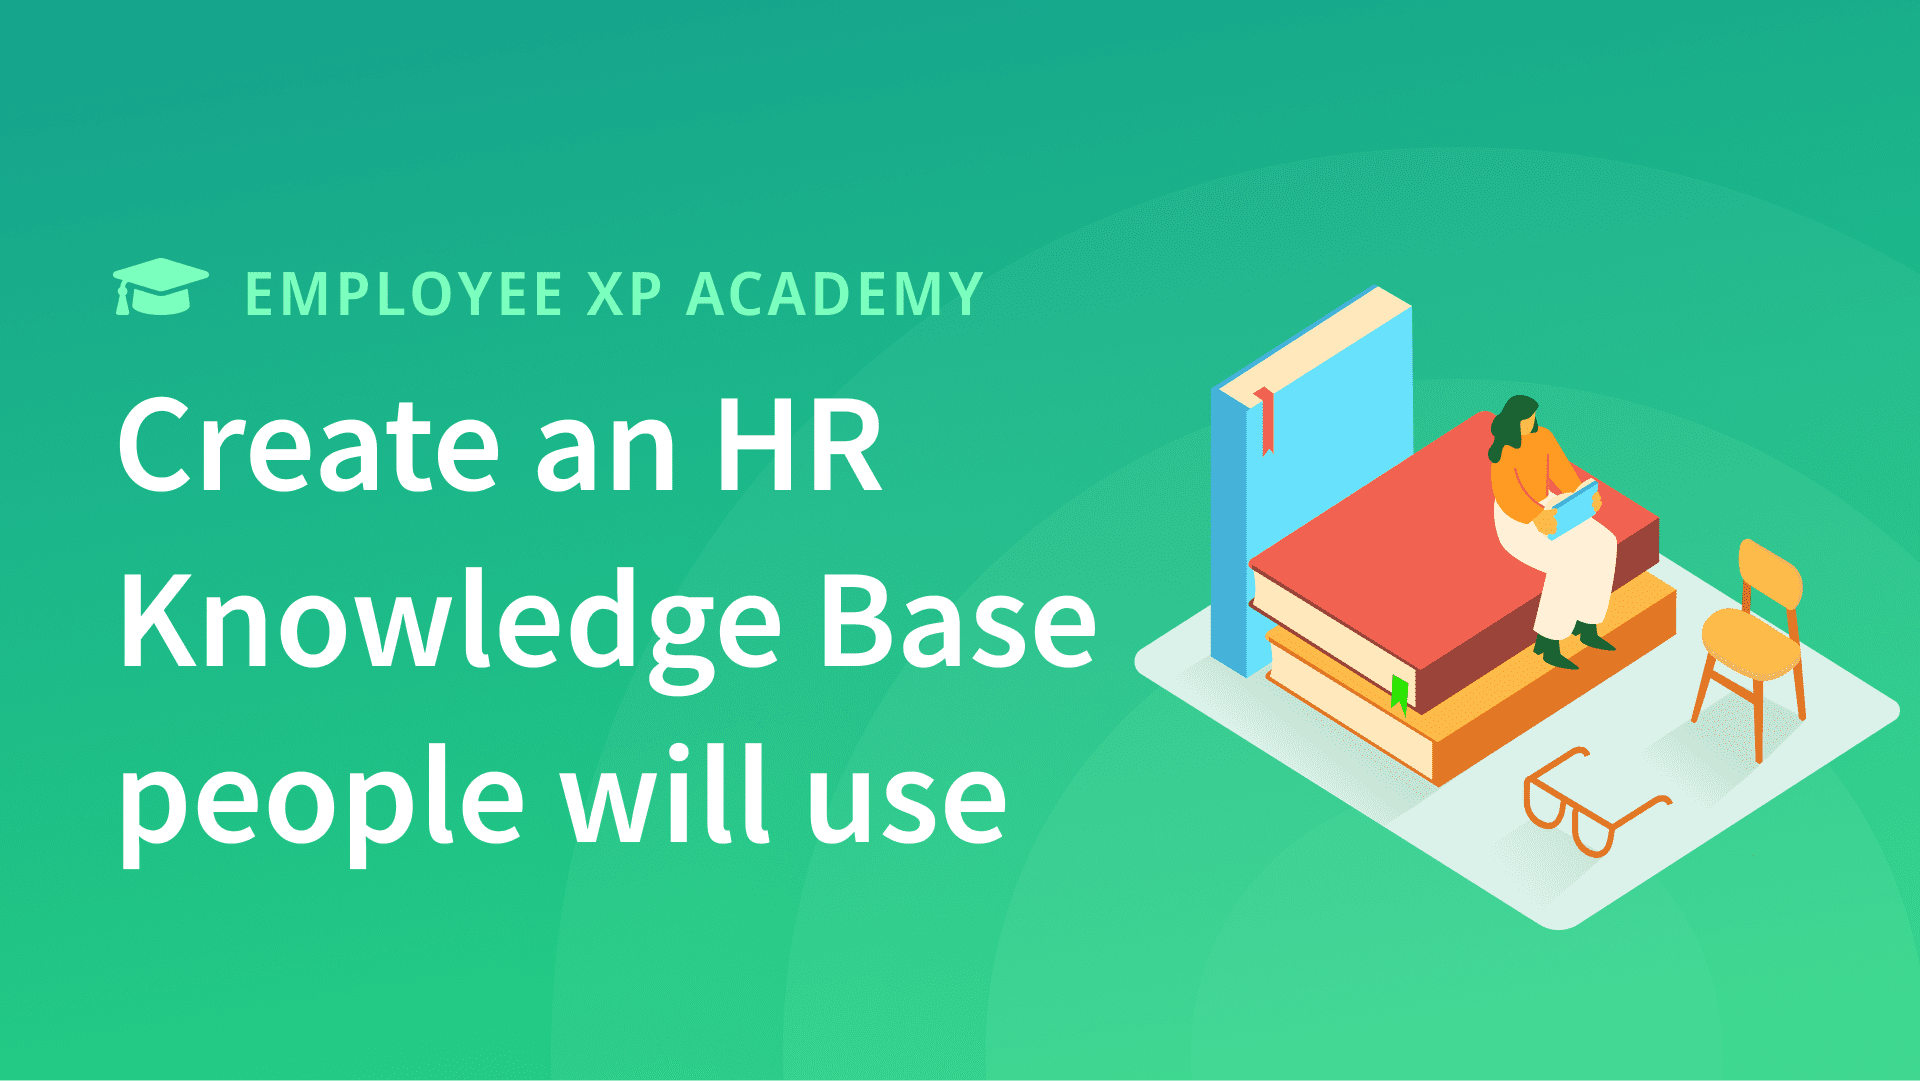 How to create an HR Knowledge Base people will use?